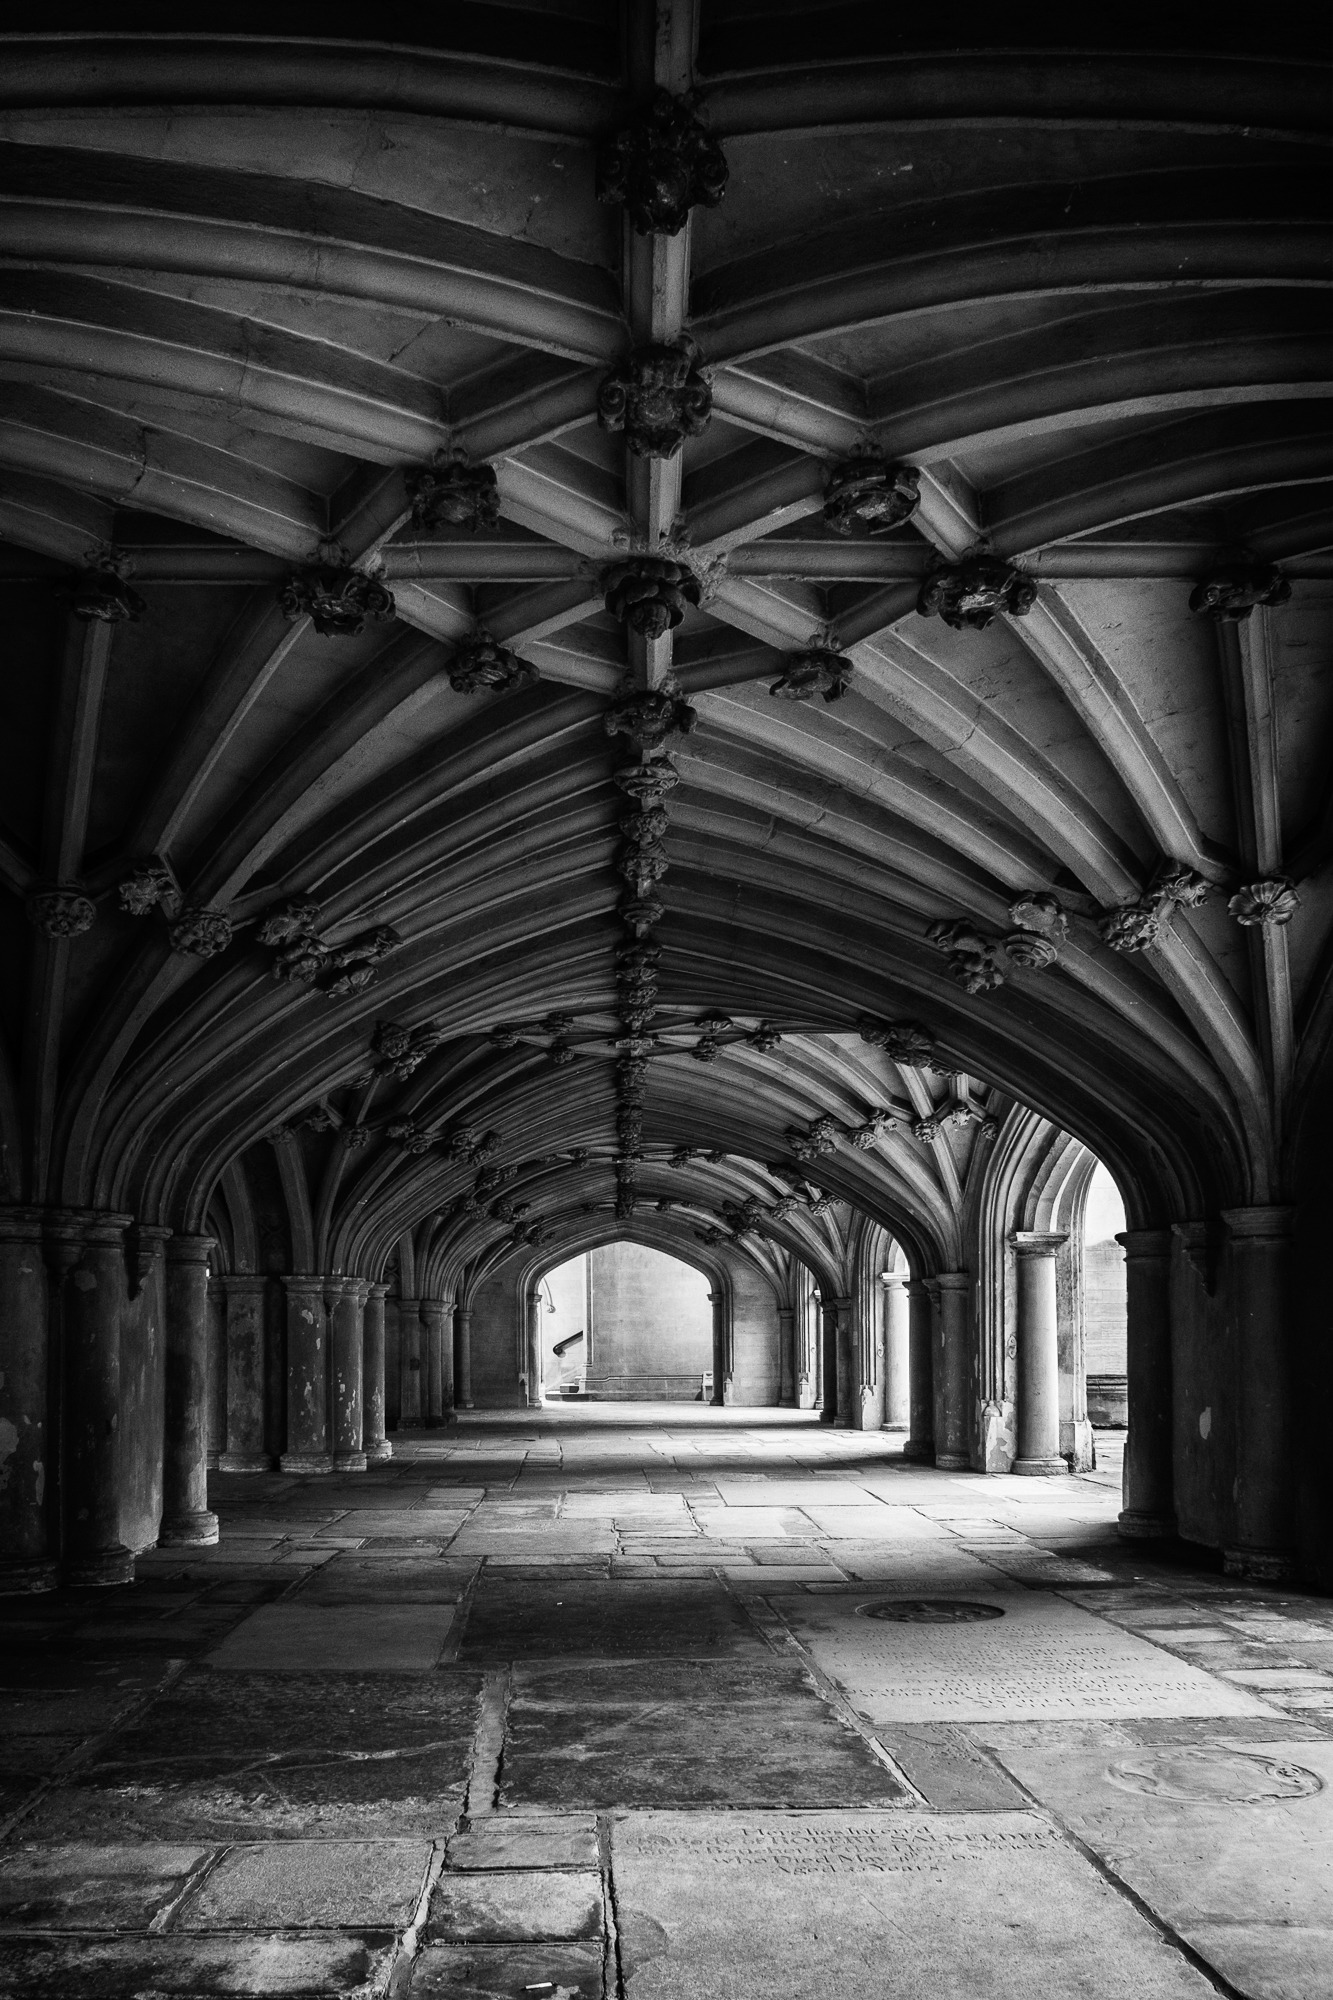 Under the Arches